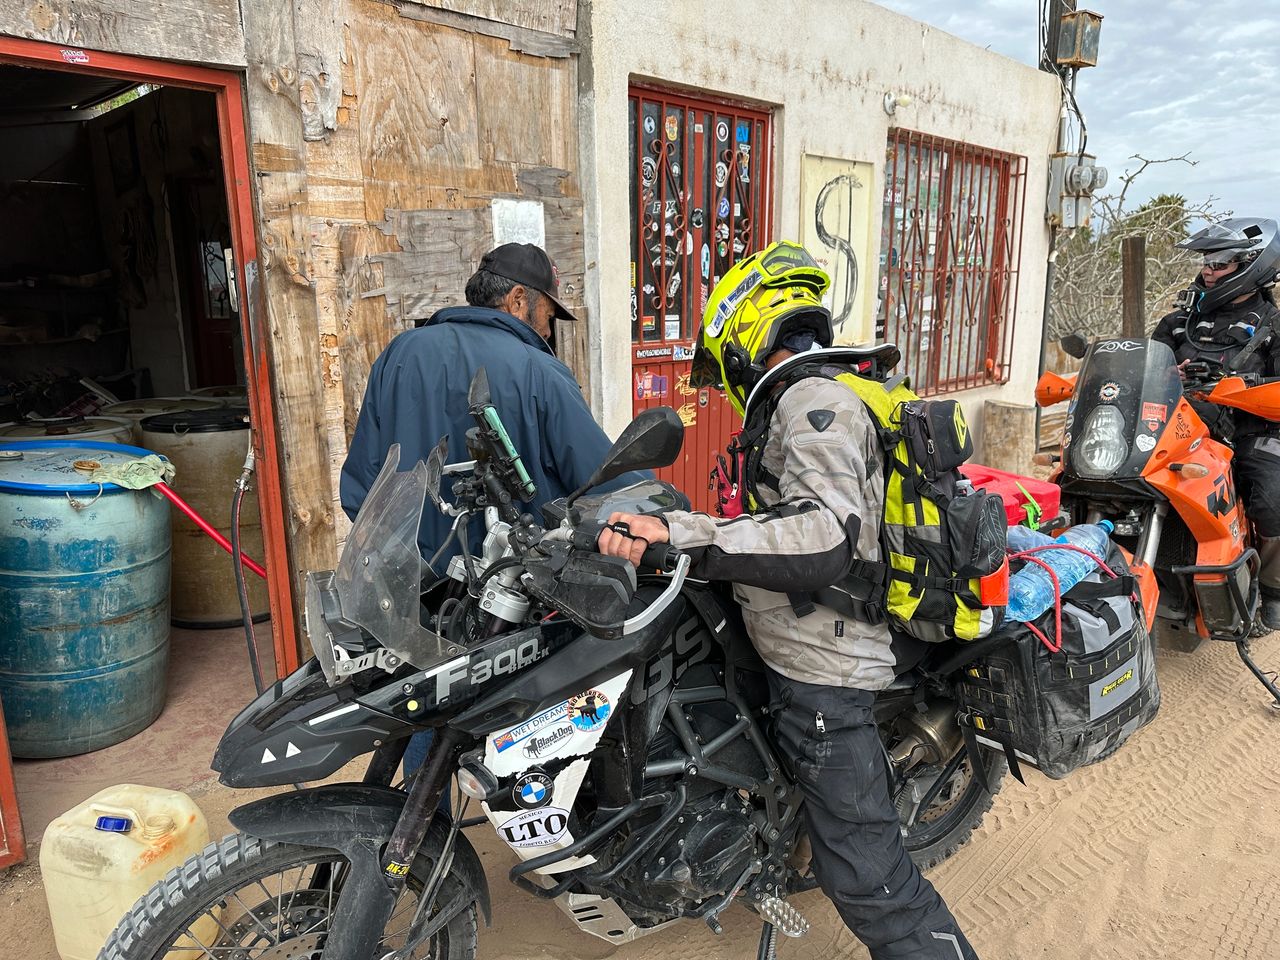 Stopping at the local "gas station" before heading north.